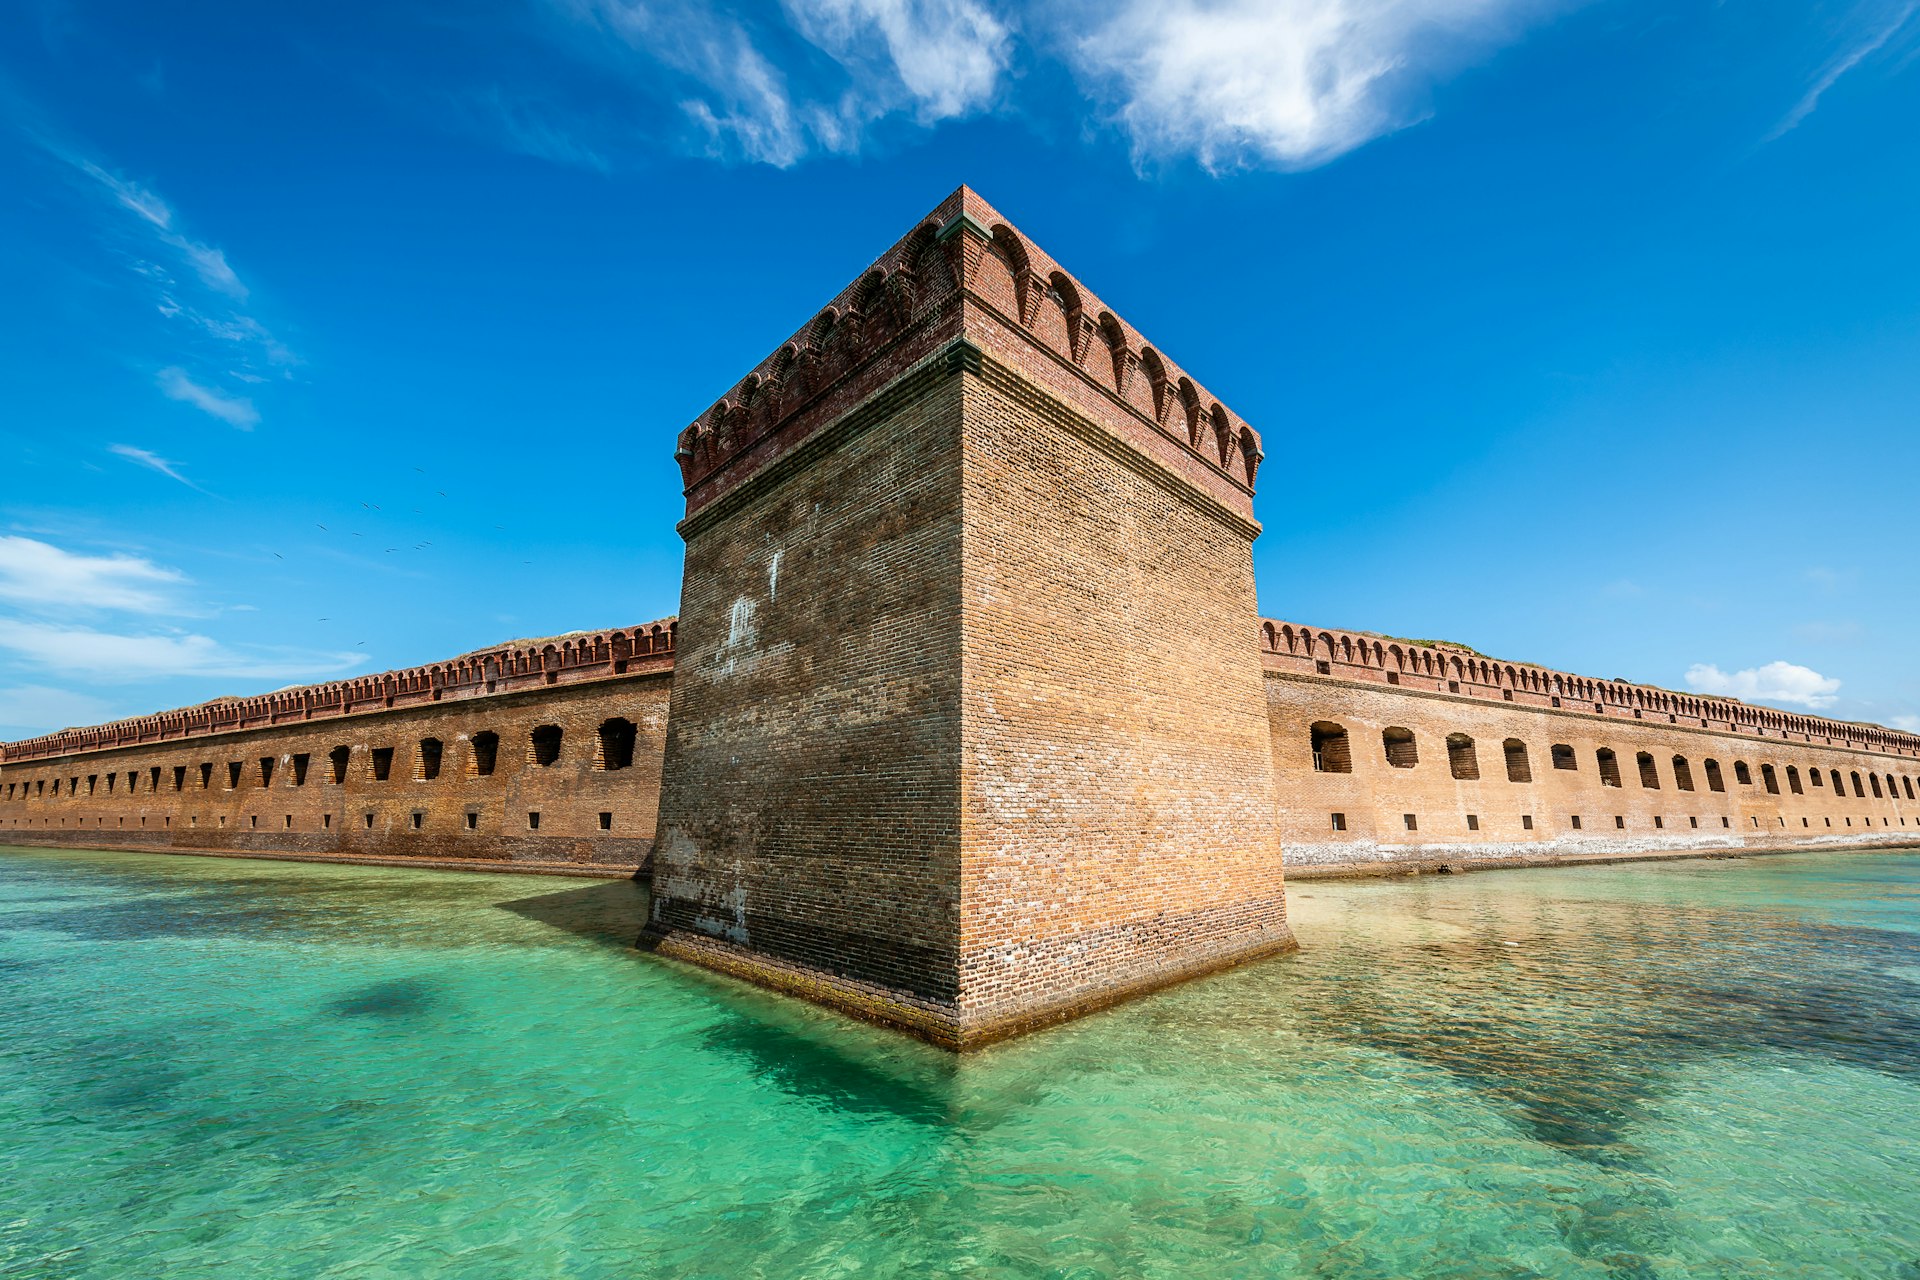 The brick wall of Fort Jefferson in Dry Tortugas National Park, Florida